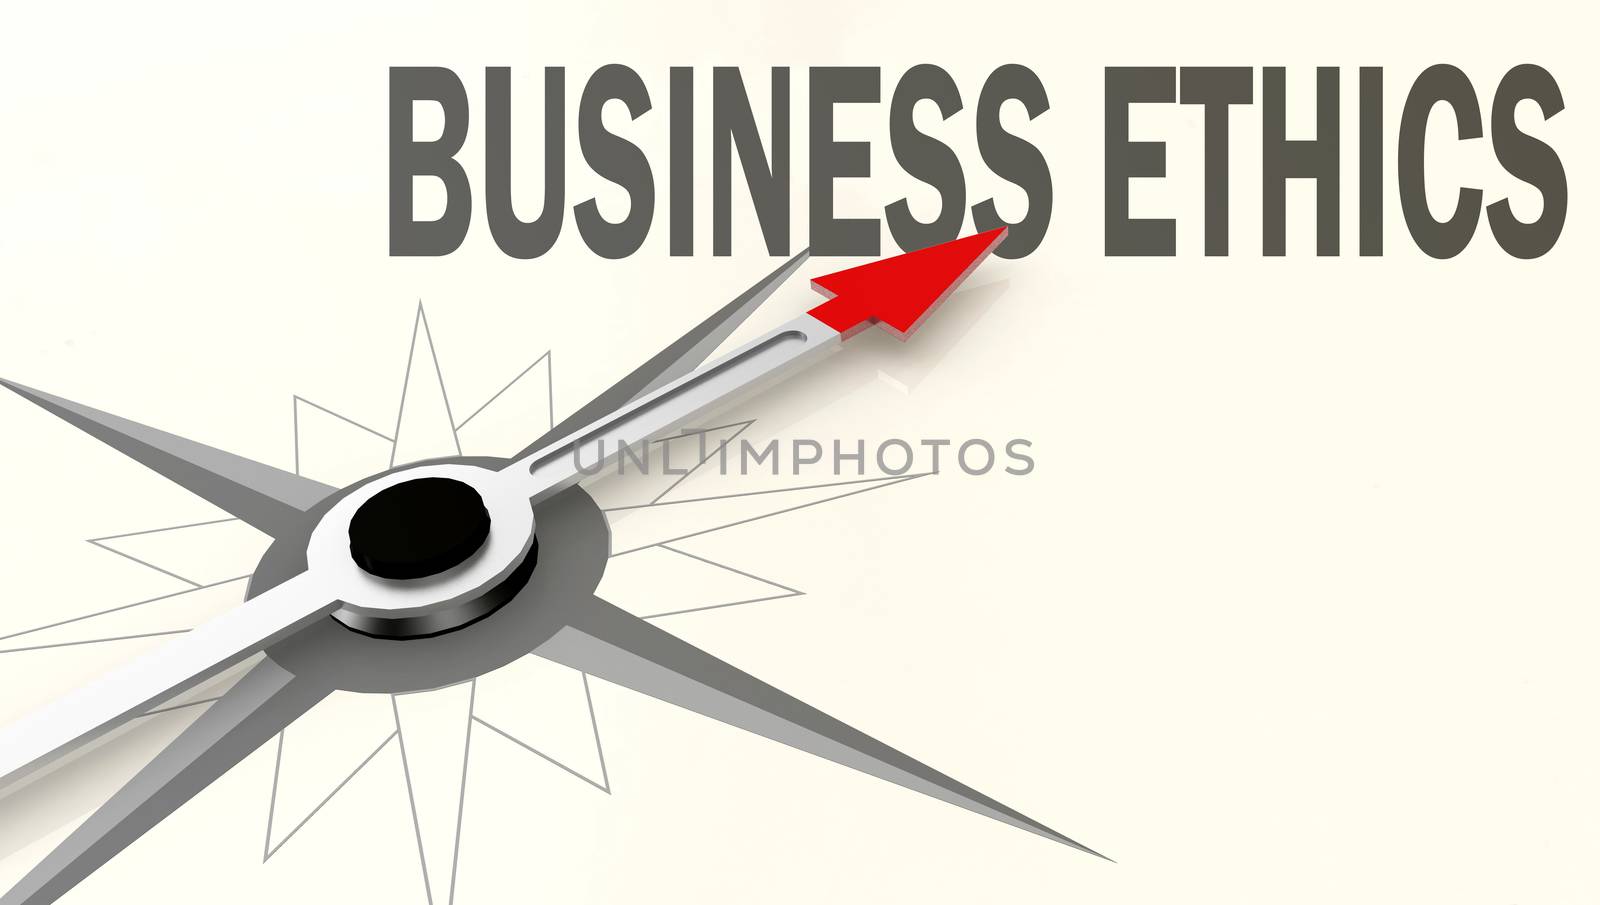 Business ethics word on compass with red arrow, 3D rendering